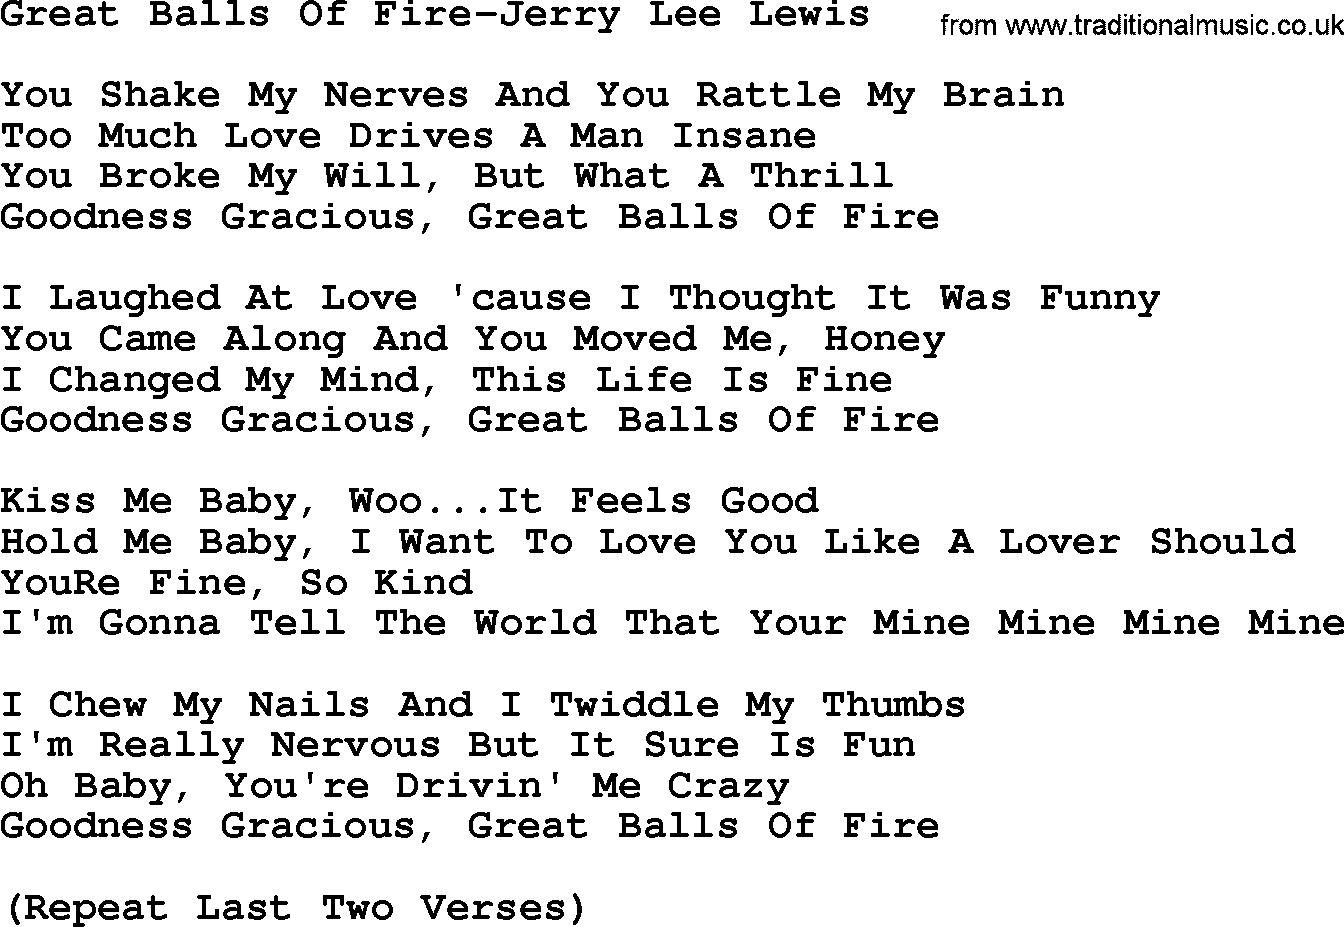 Country music song: Great Balls Of Fire-Jerry Lee Lewis lyrics and chords